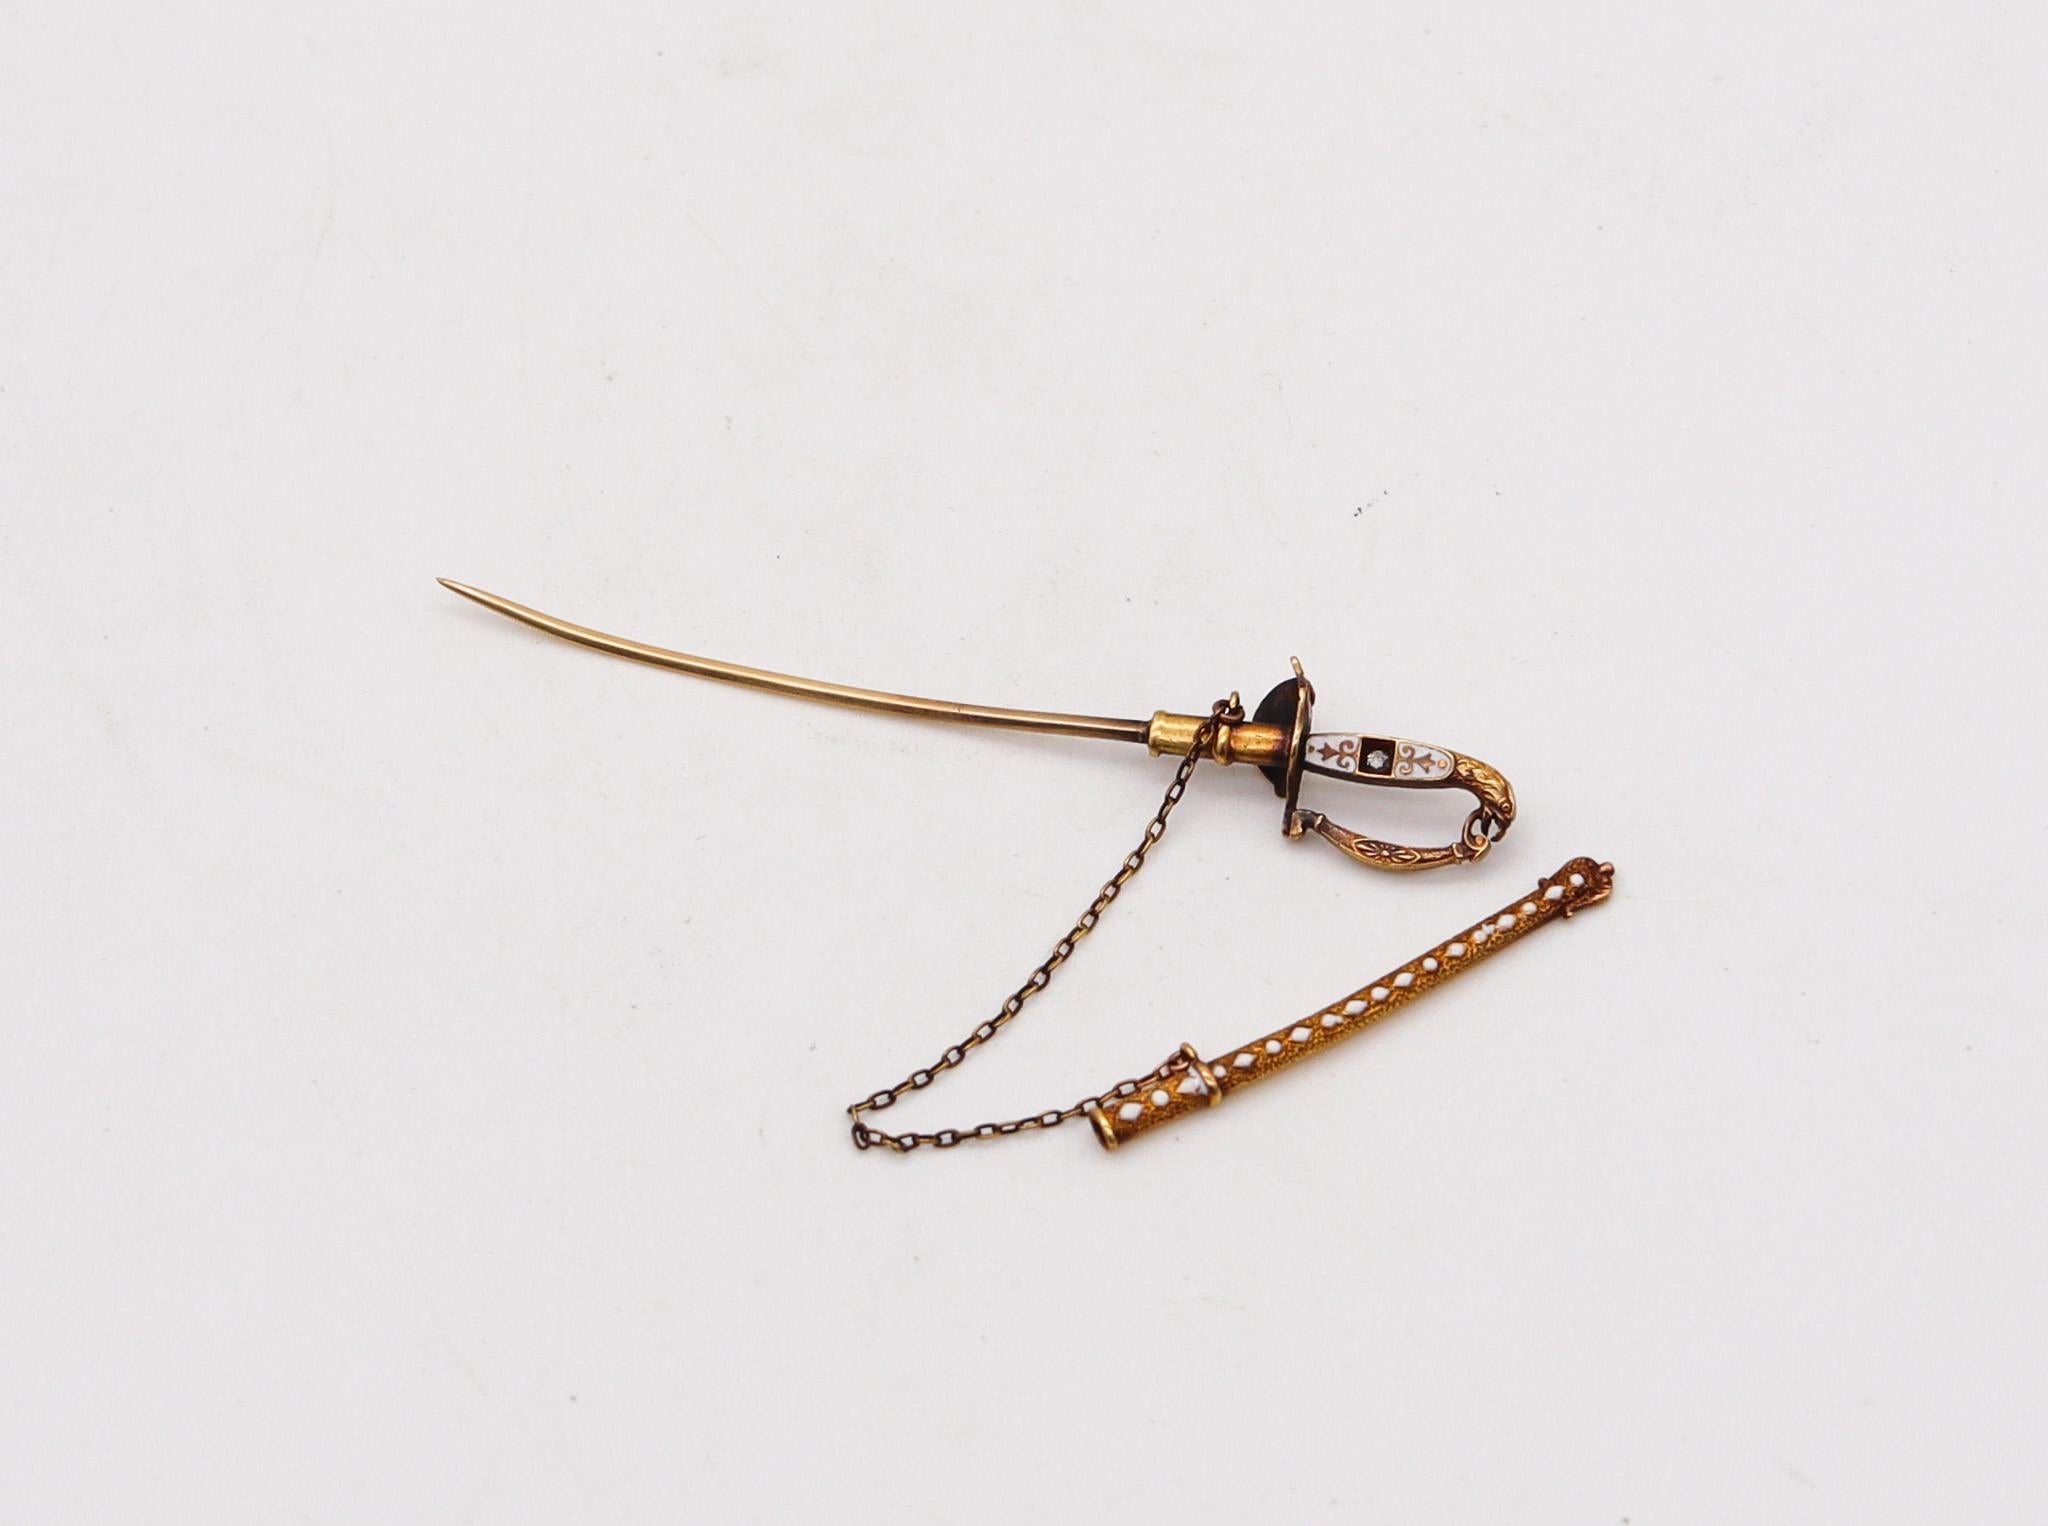 Old European Cut American 1860 Miniature Enameled Sword Jabot In 14Kt Yellow Gold & Diamond For Sale